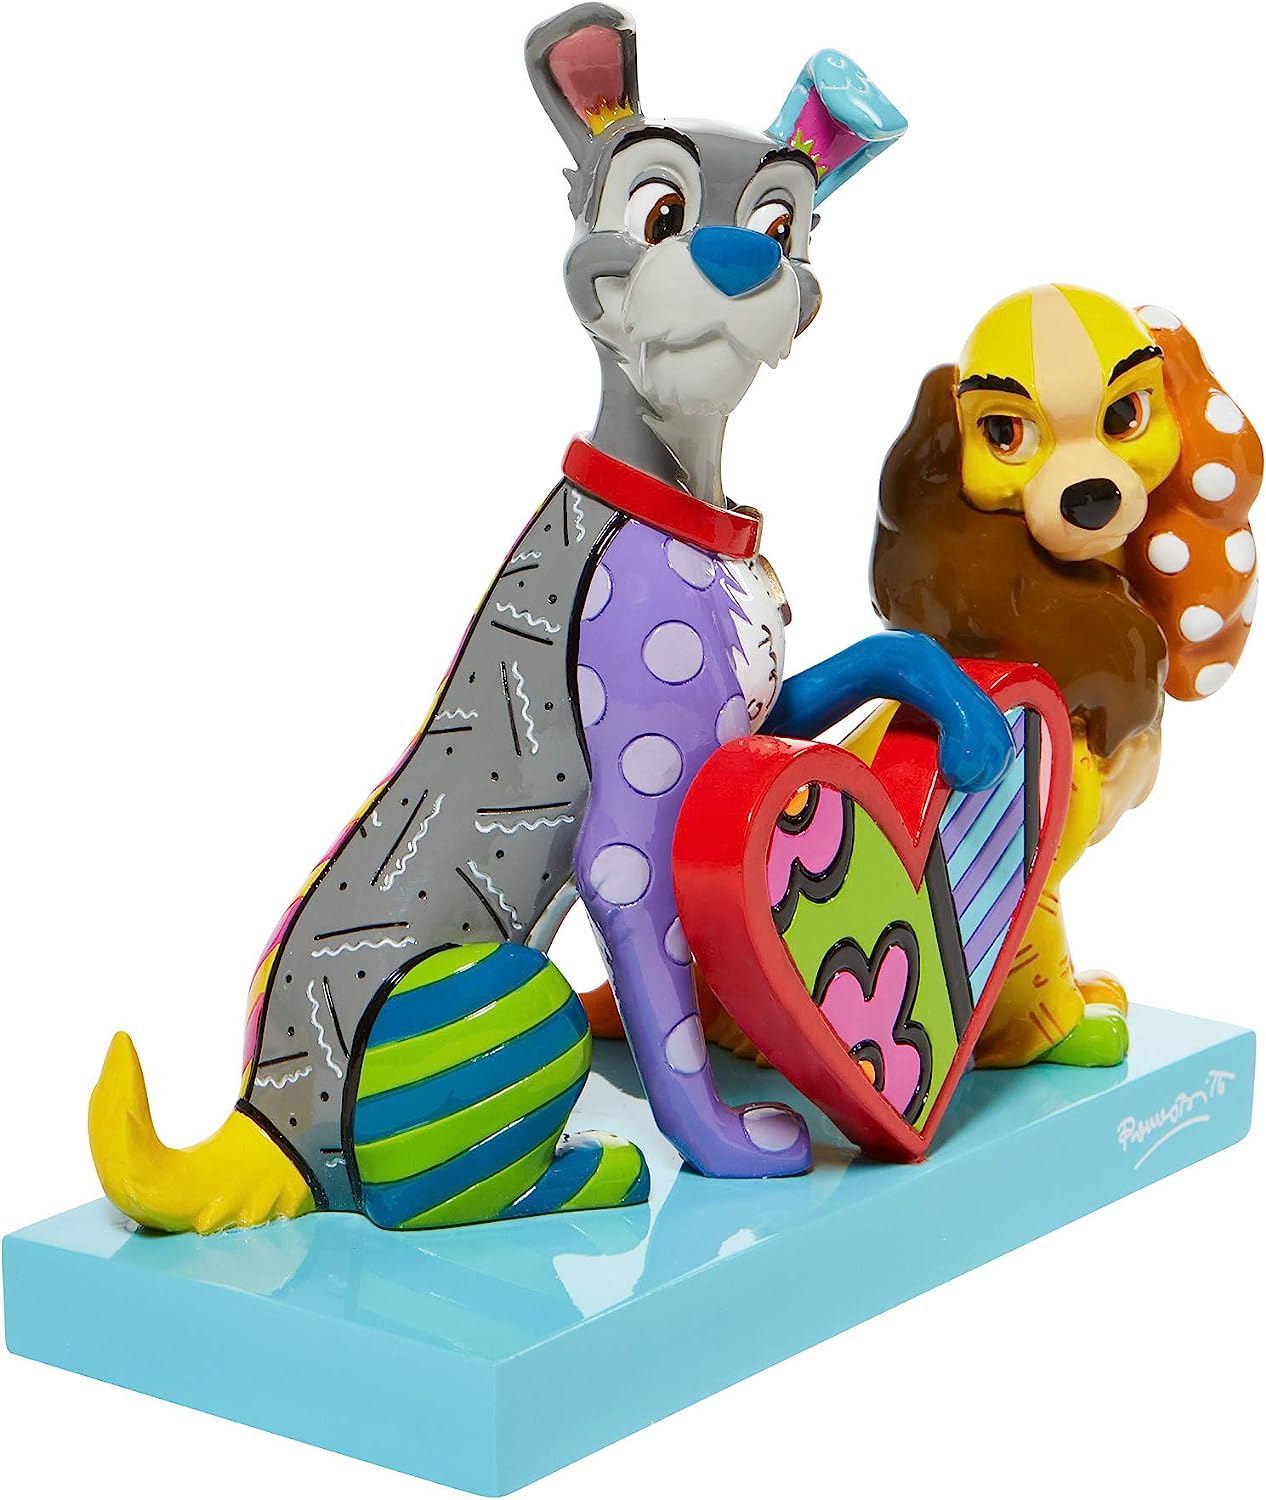 Disney Britto Lady and the Tramp Figure 6008528 EX DISPLAY